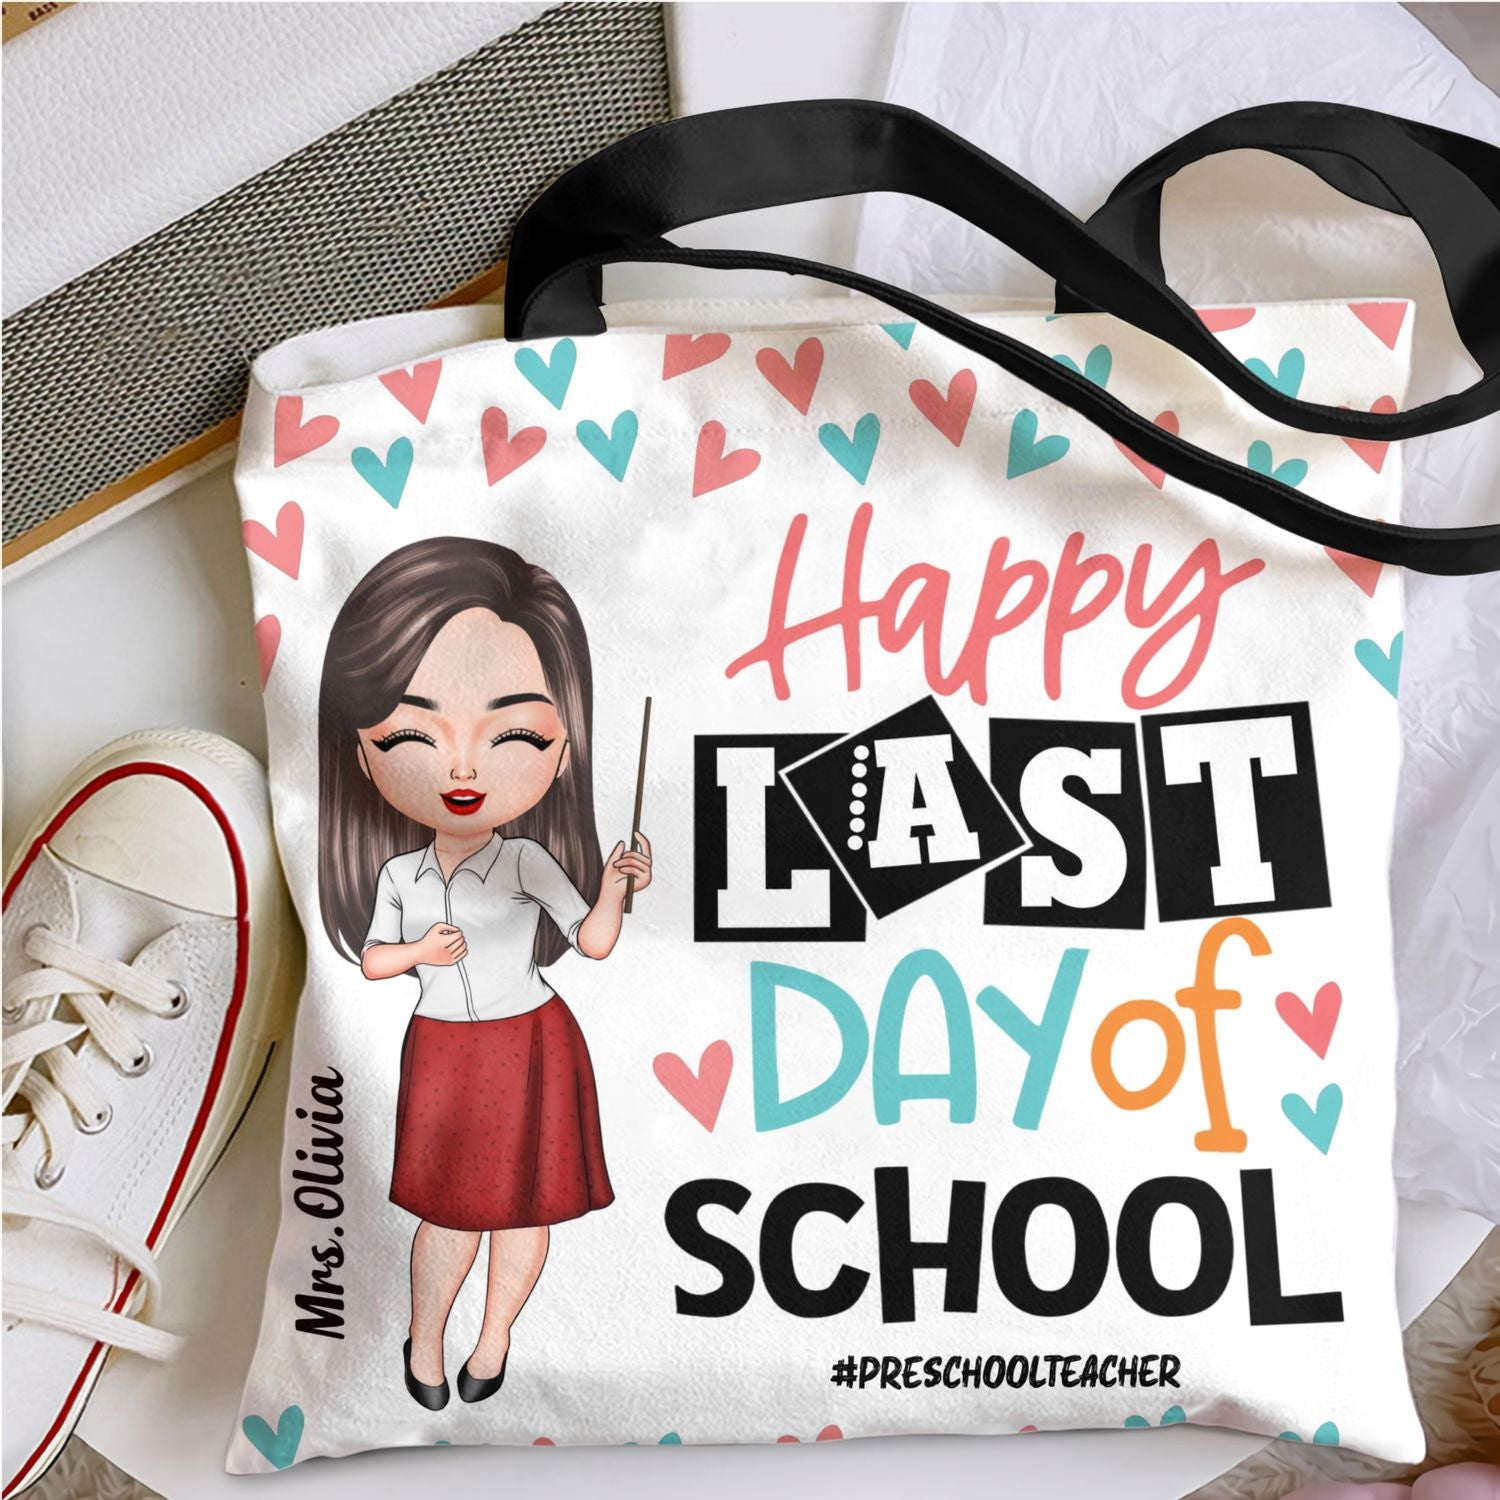 Personalized Tote Bag - Gift For Teacher - Happy Last Day Of School